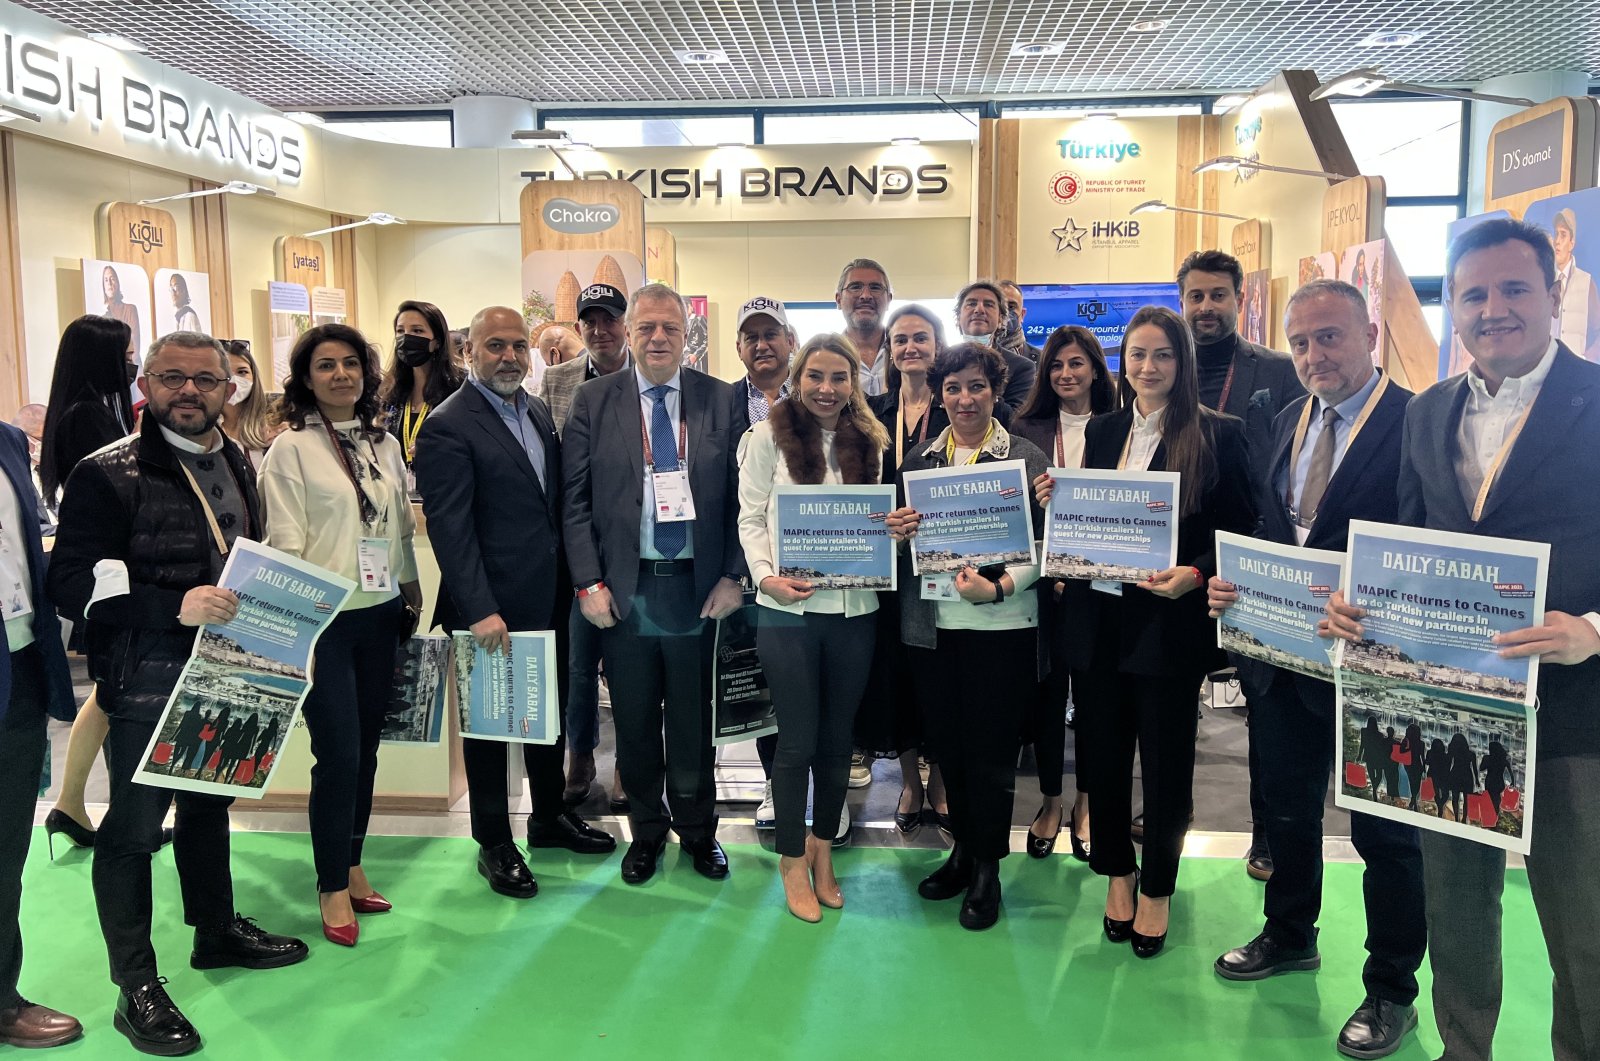 Executives of Turkish retail companies and Turkuvaz Media Group at the Turkish Brands booth during the MAPIC fair, Cannes, France, Nov. 30, 2021.